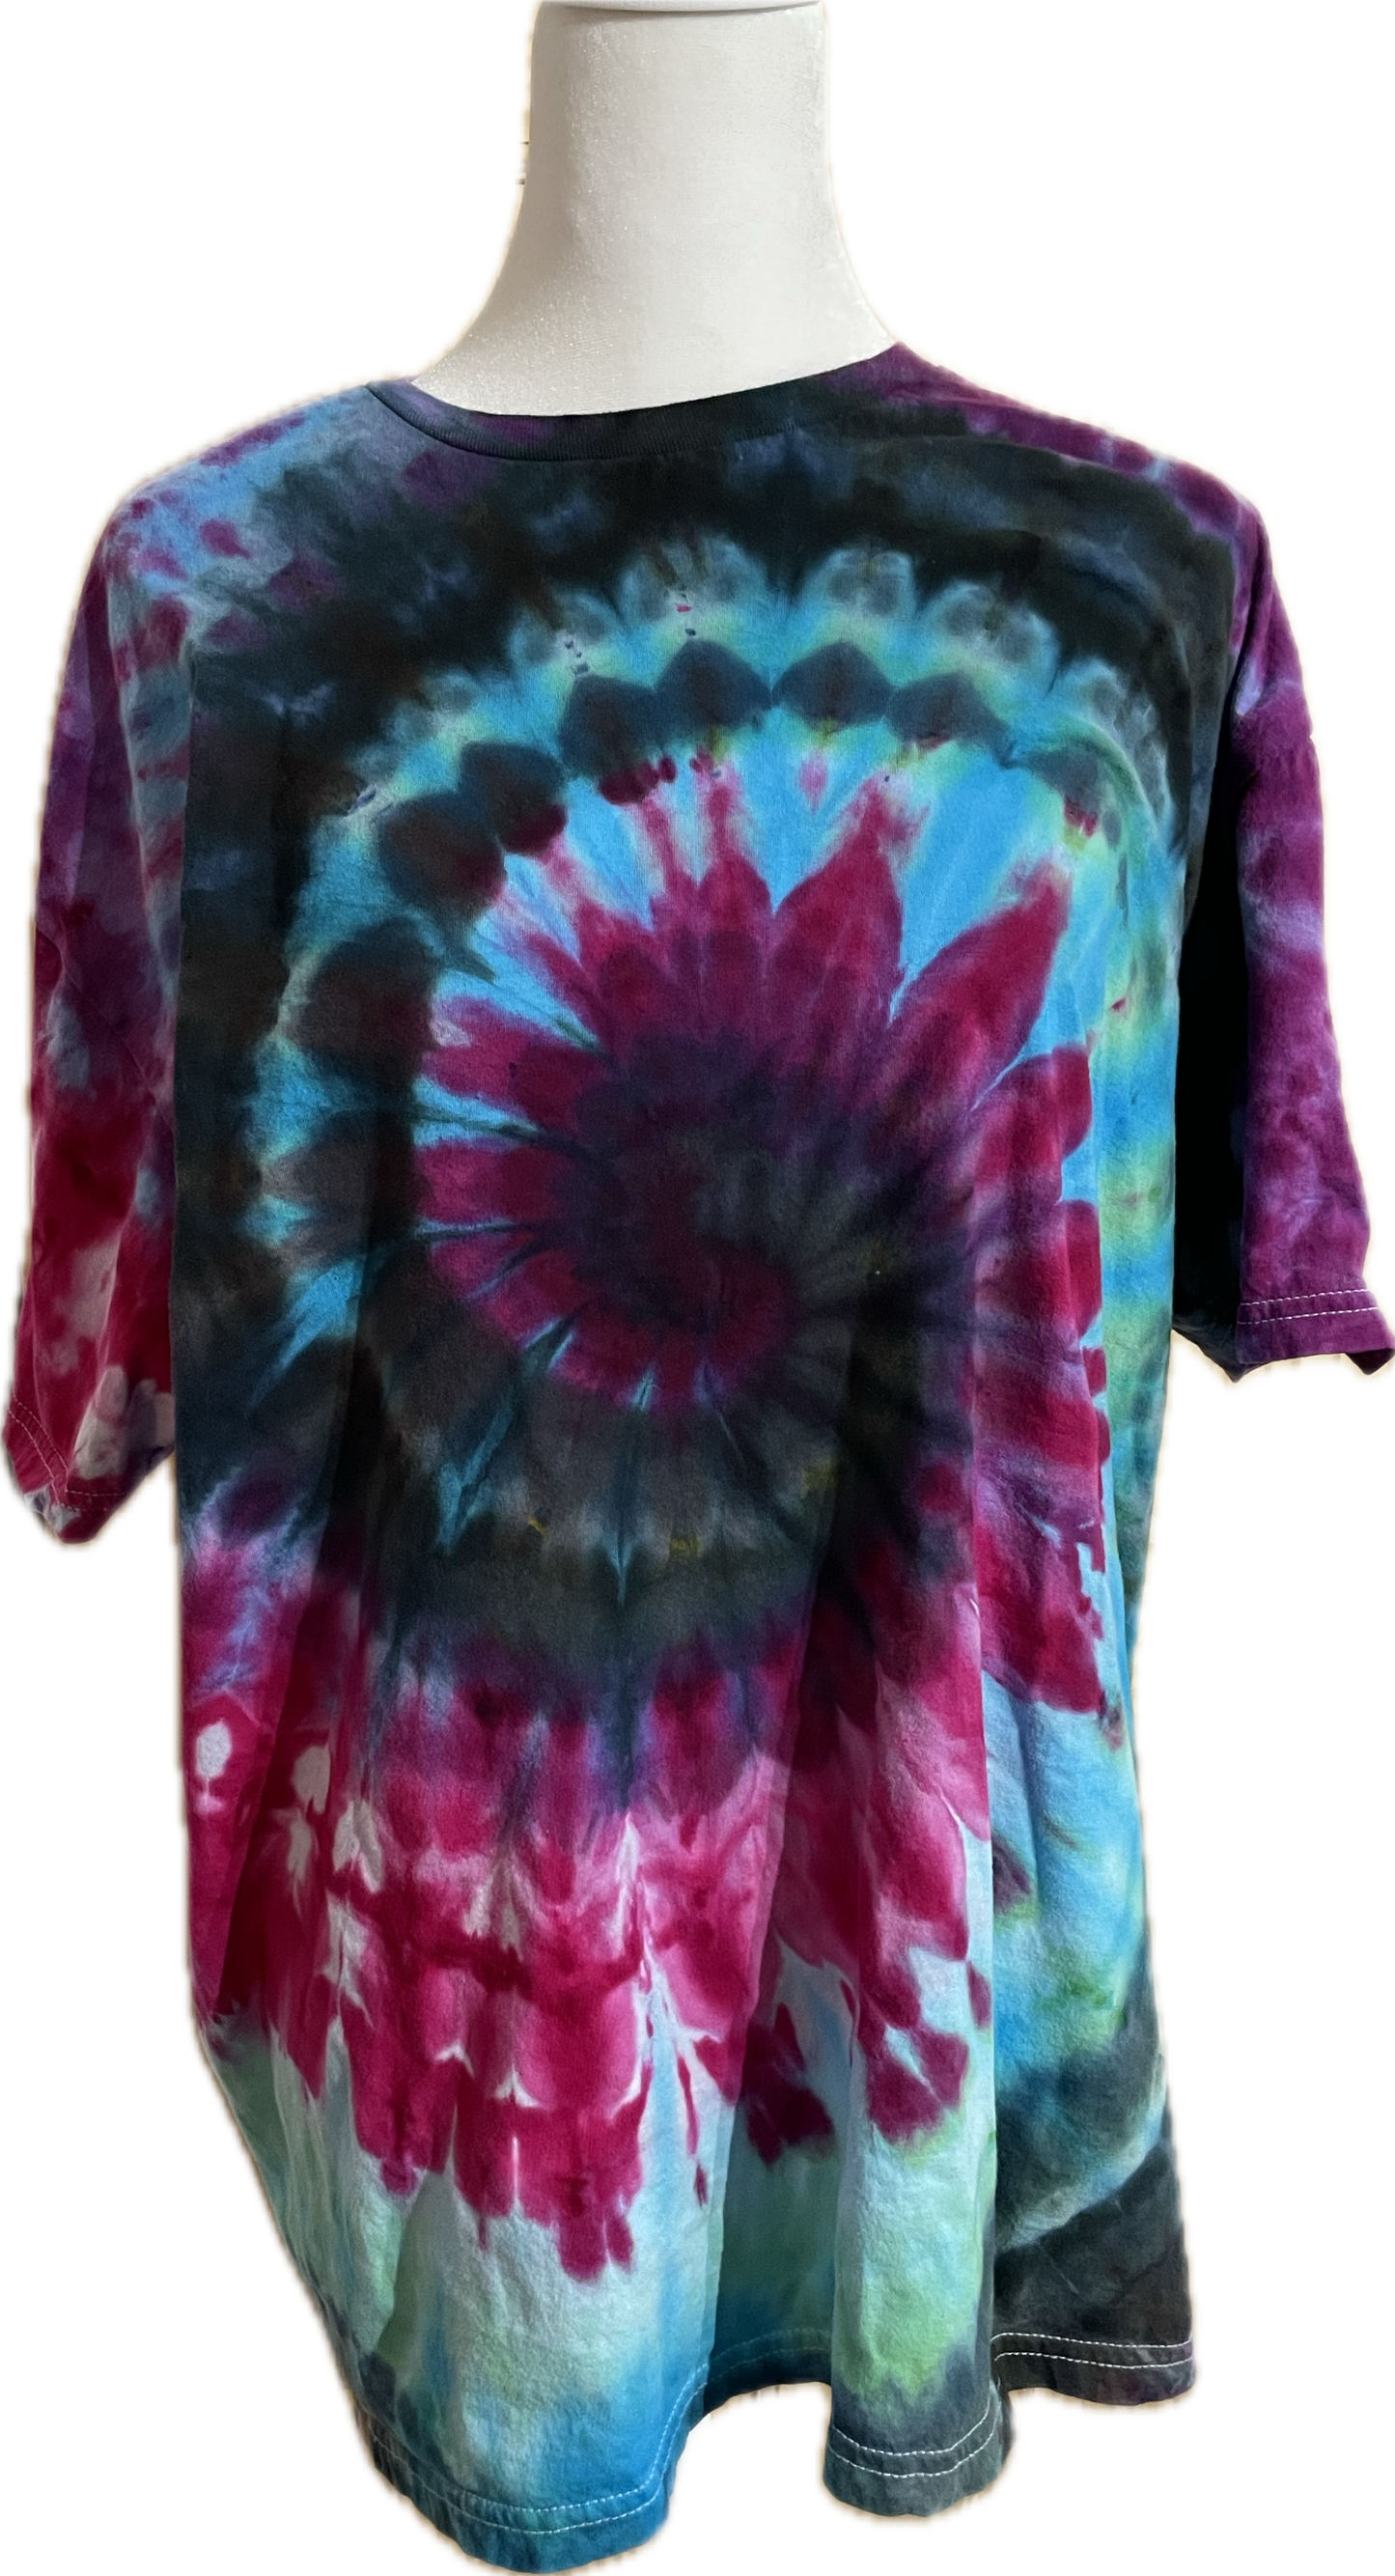 Size X-Large black pink and blue tie dye short sleeve t-shirt